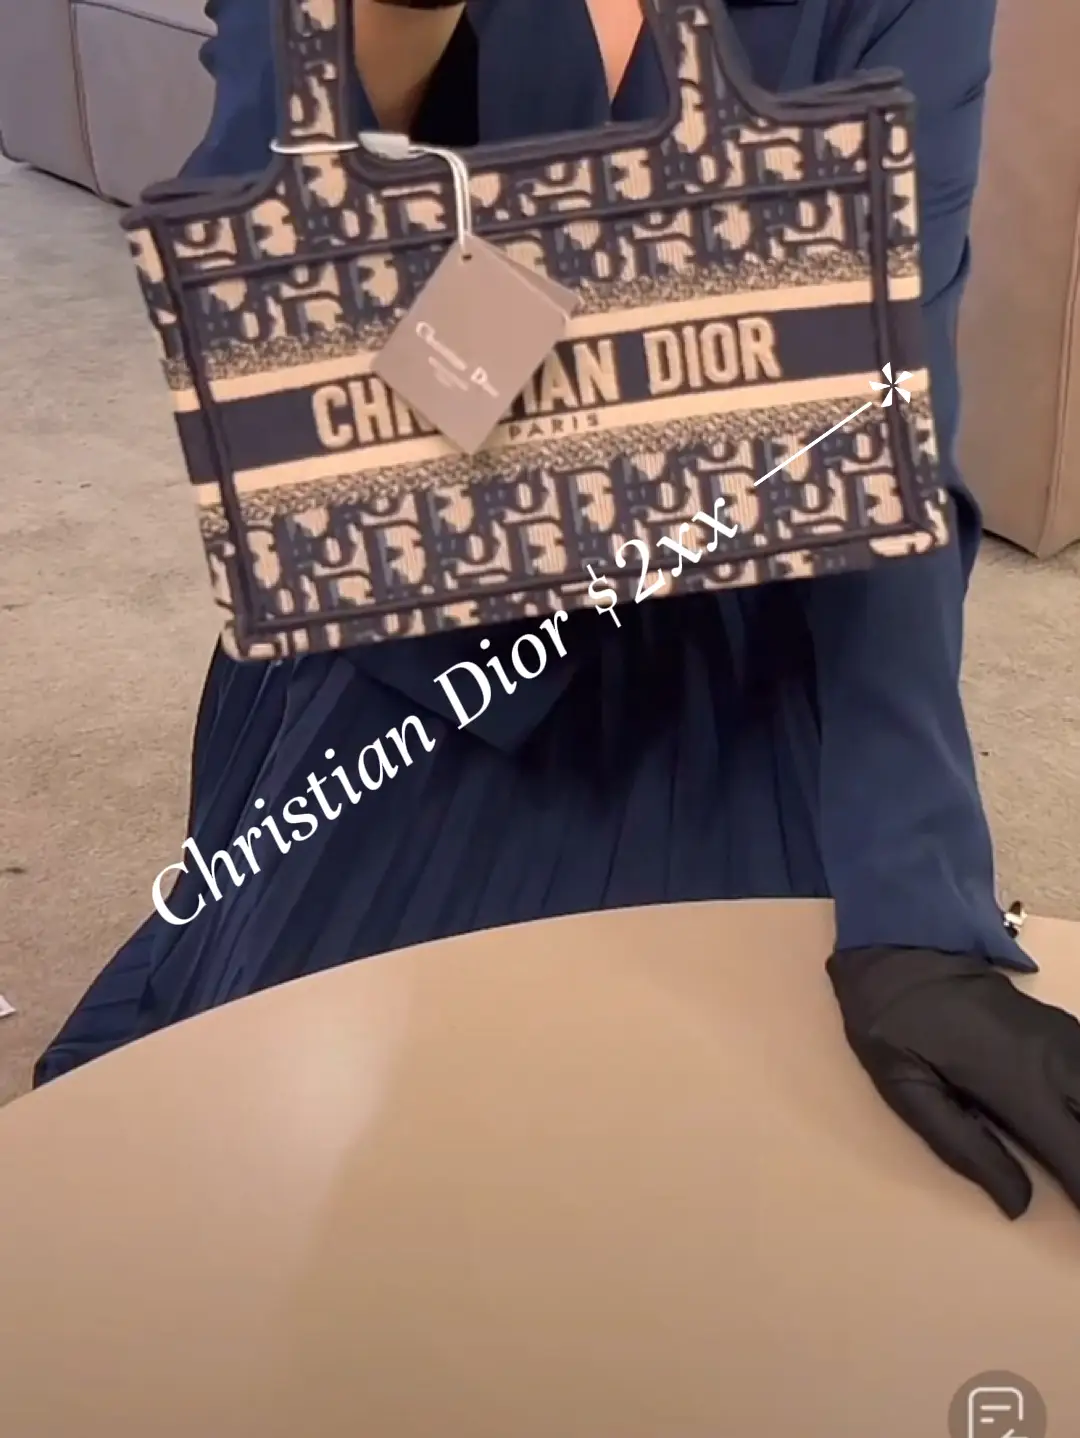 Dior Book Tote Reveal, Triple Unboxing & How I Saved $500 on the Christian  Dior Oblique Book Tote! 